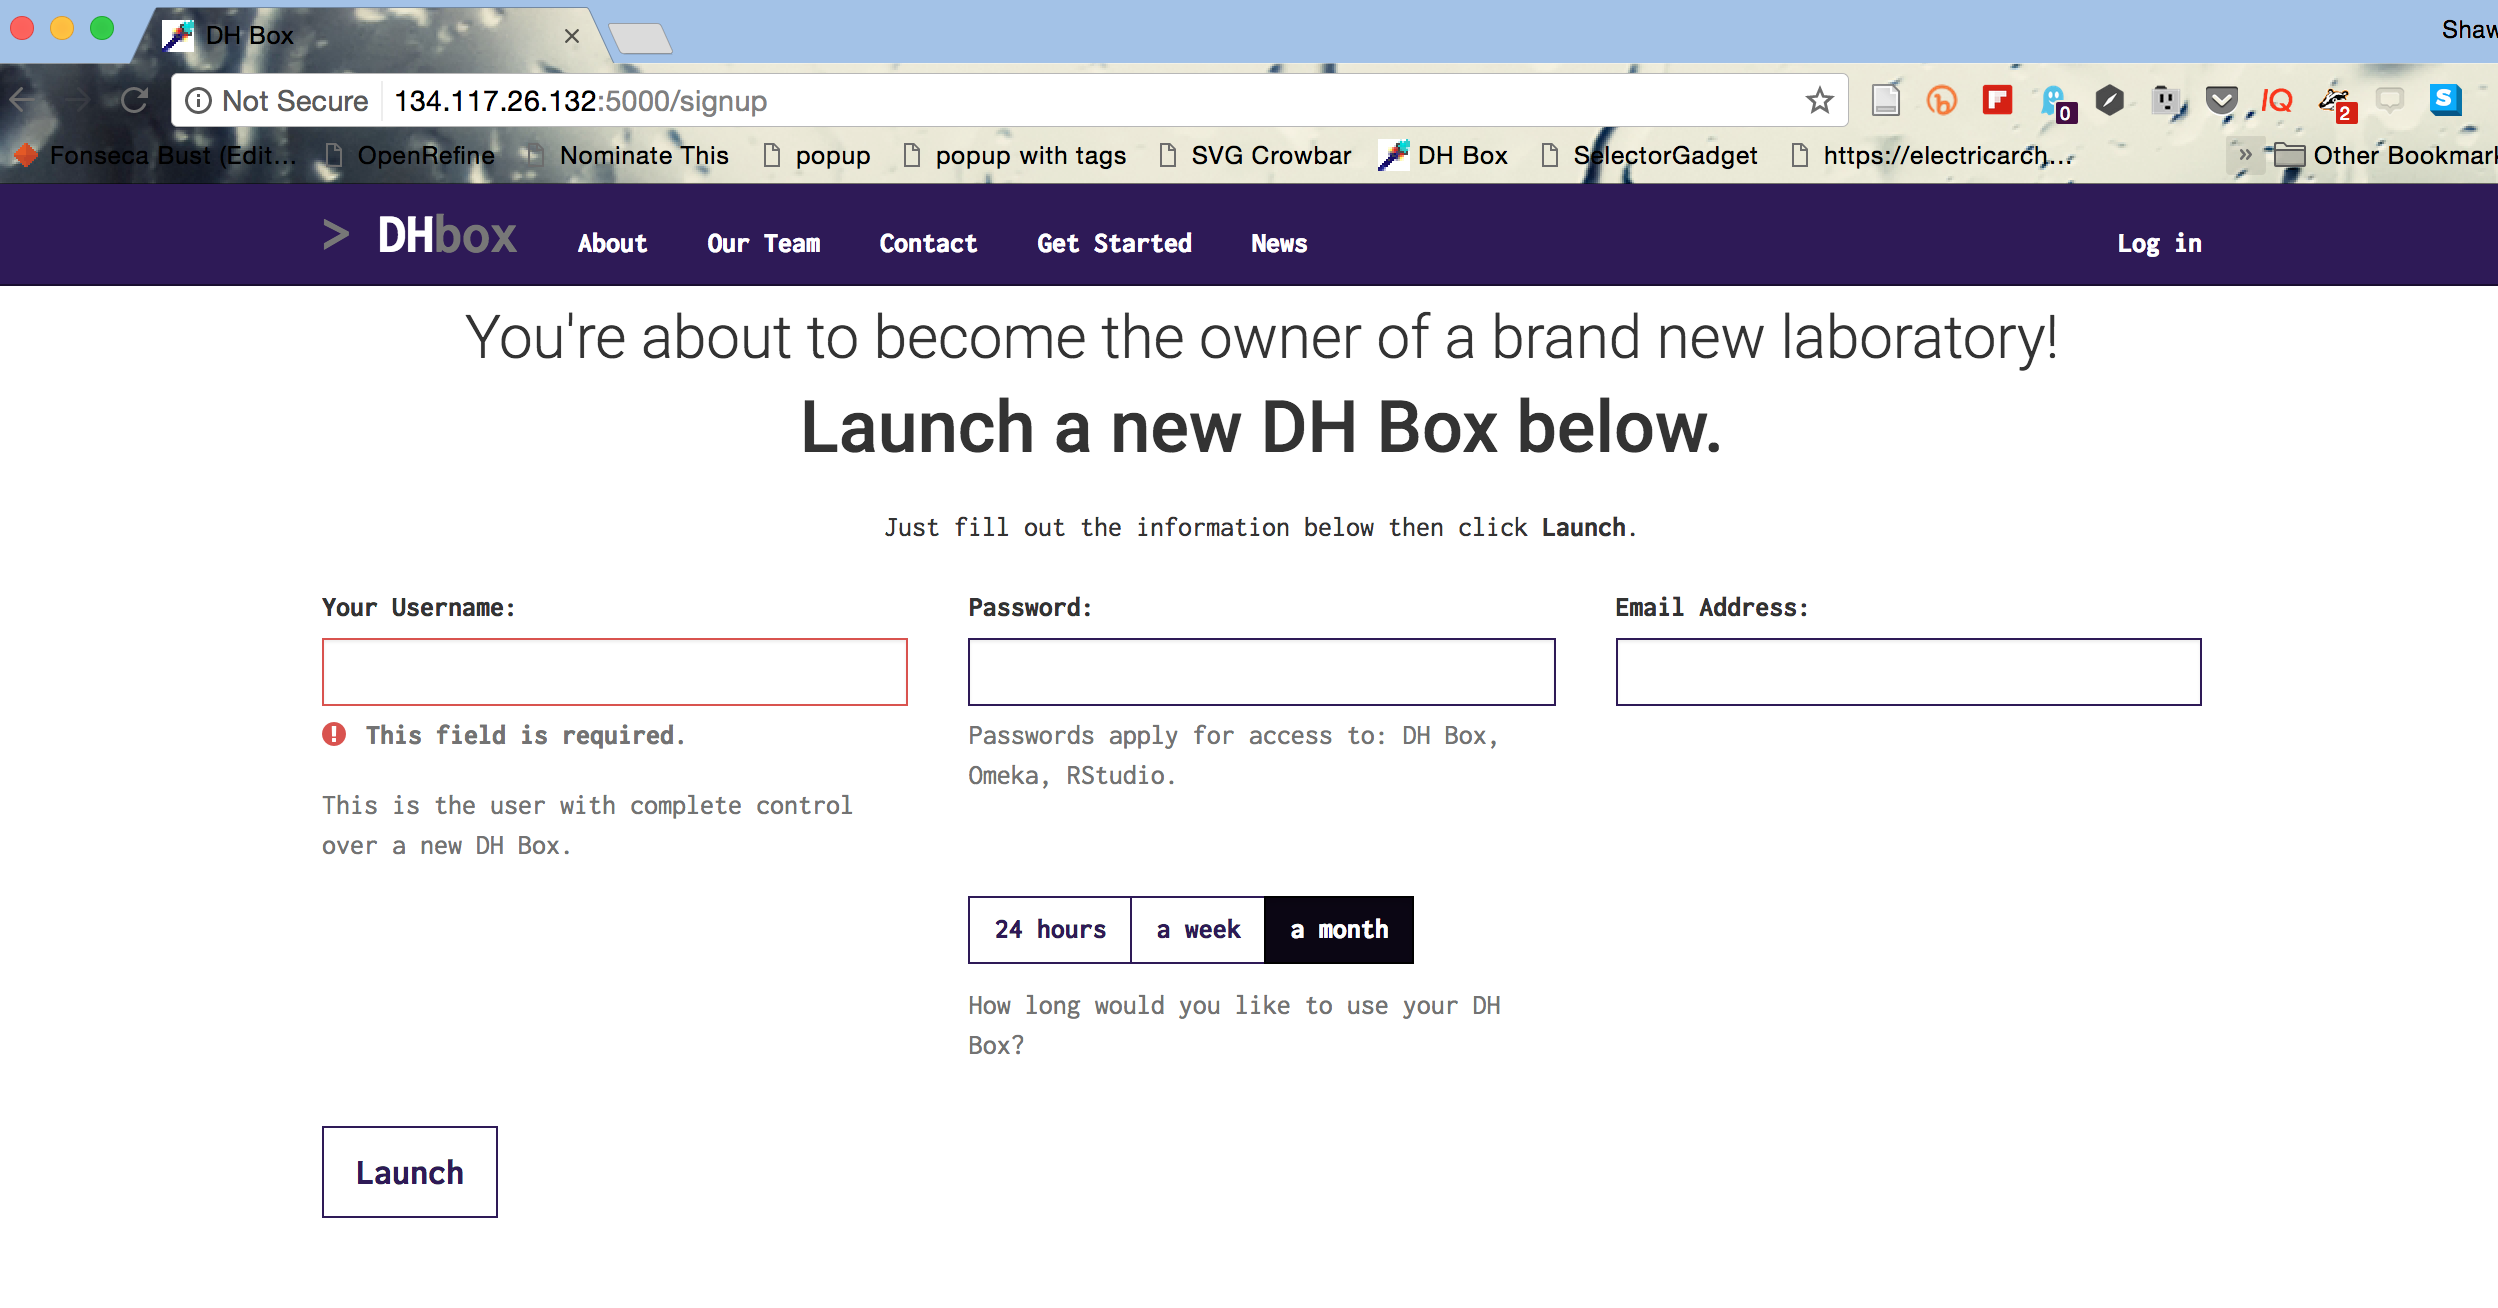 The DHBox signup screen